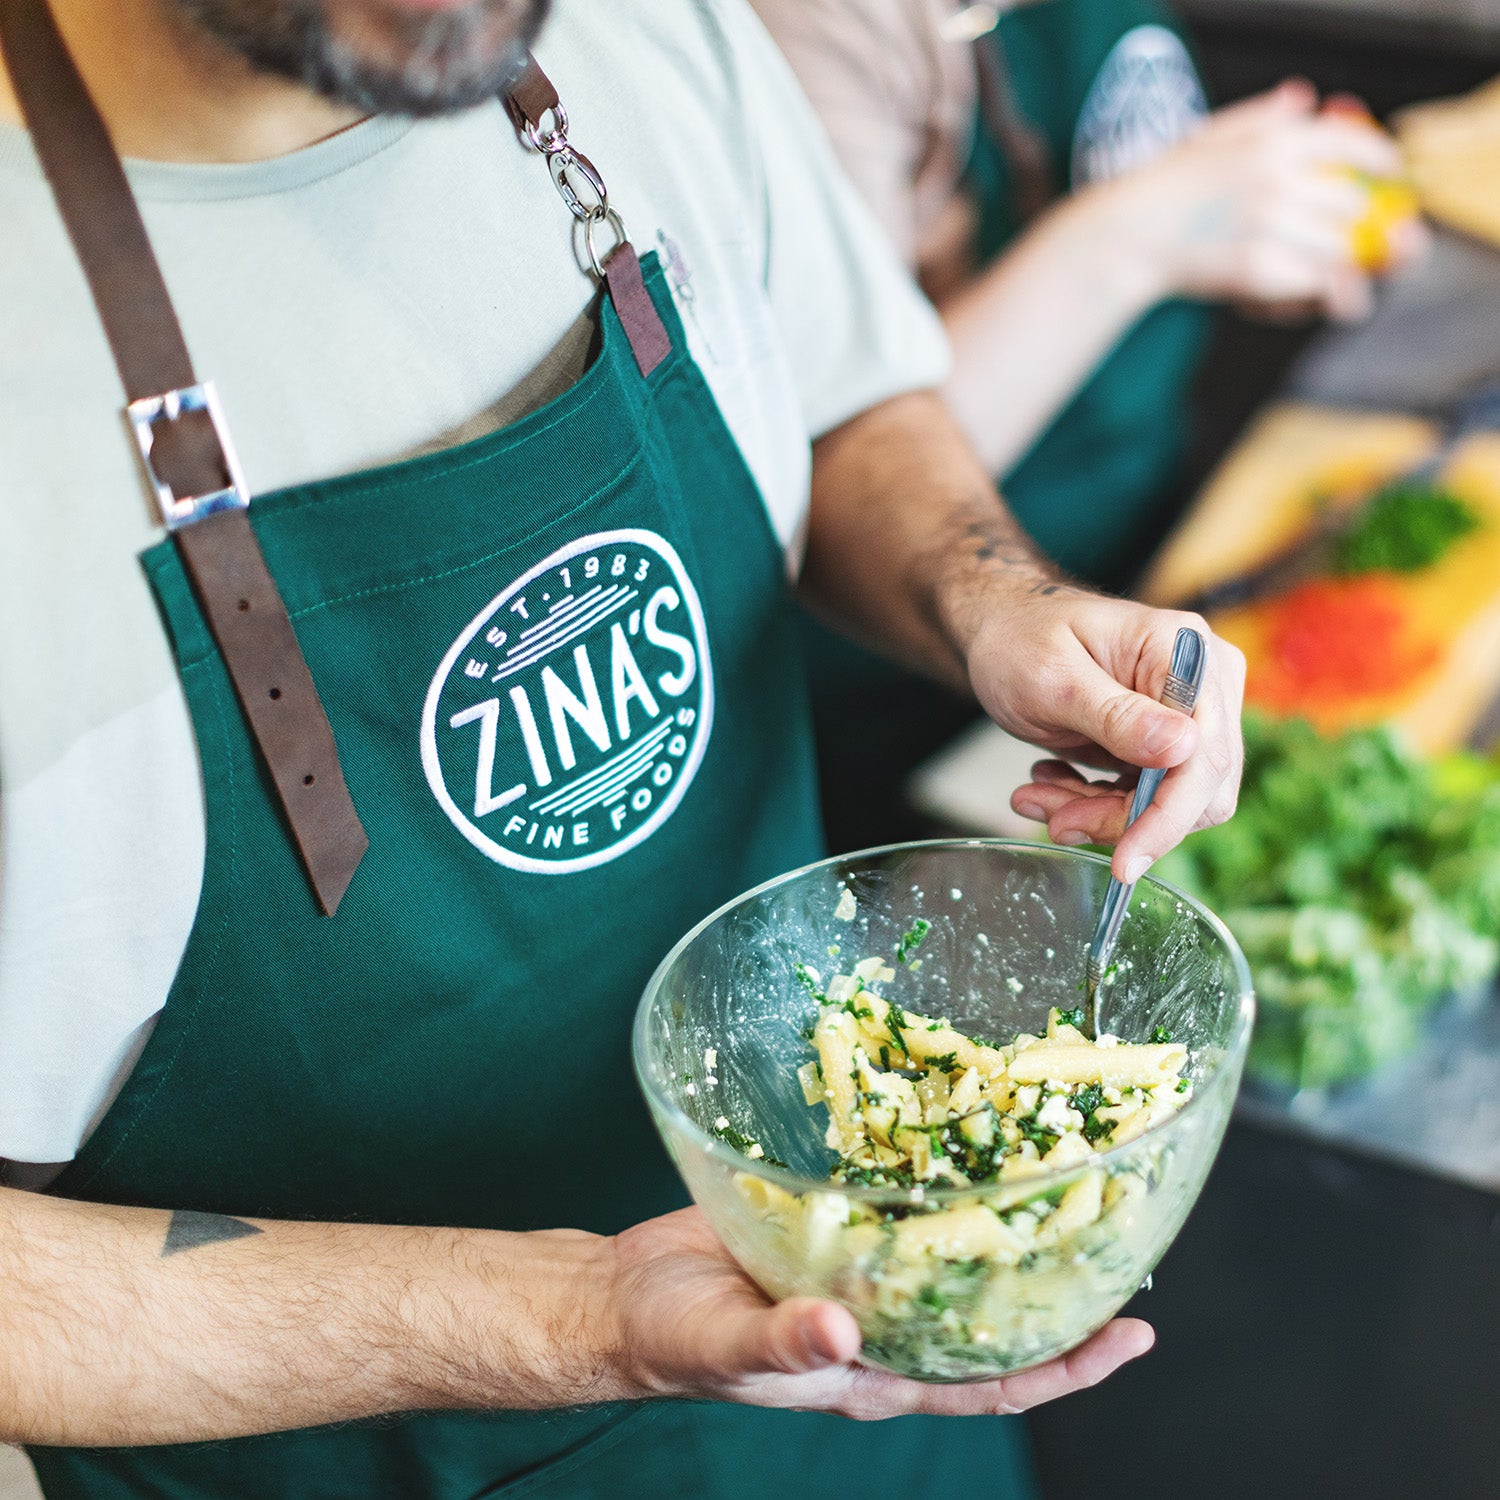 How to Do It Right as a Small Business Owner : Learn from Zina's Fine Foods 